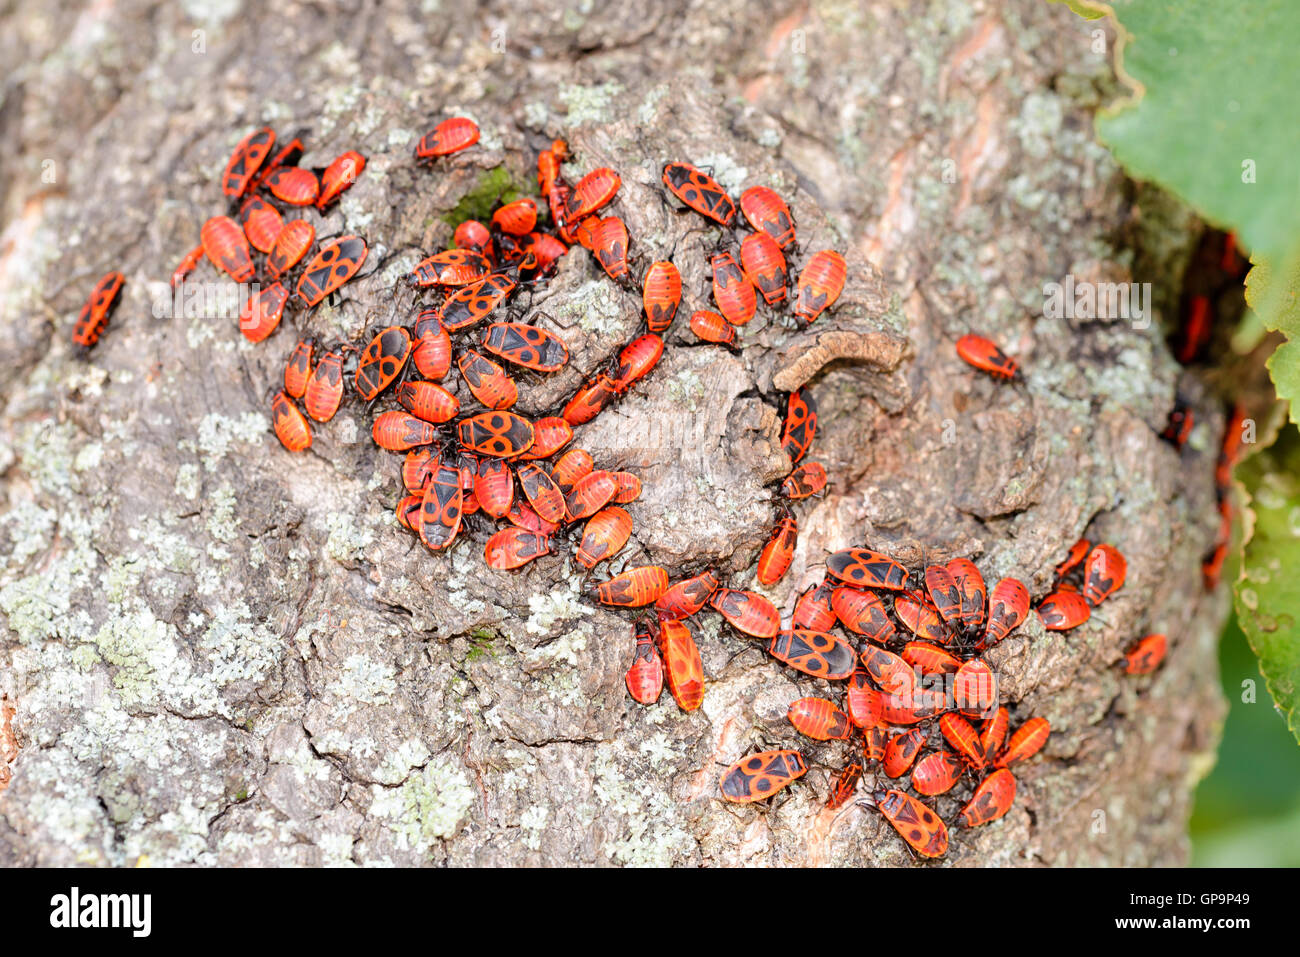 Colony of black and red Firebug or Pyrrhocoris apterus, adults and nymphs, on a tree trunk Stock Photo